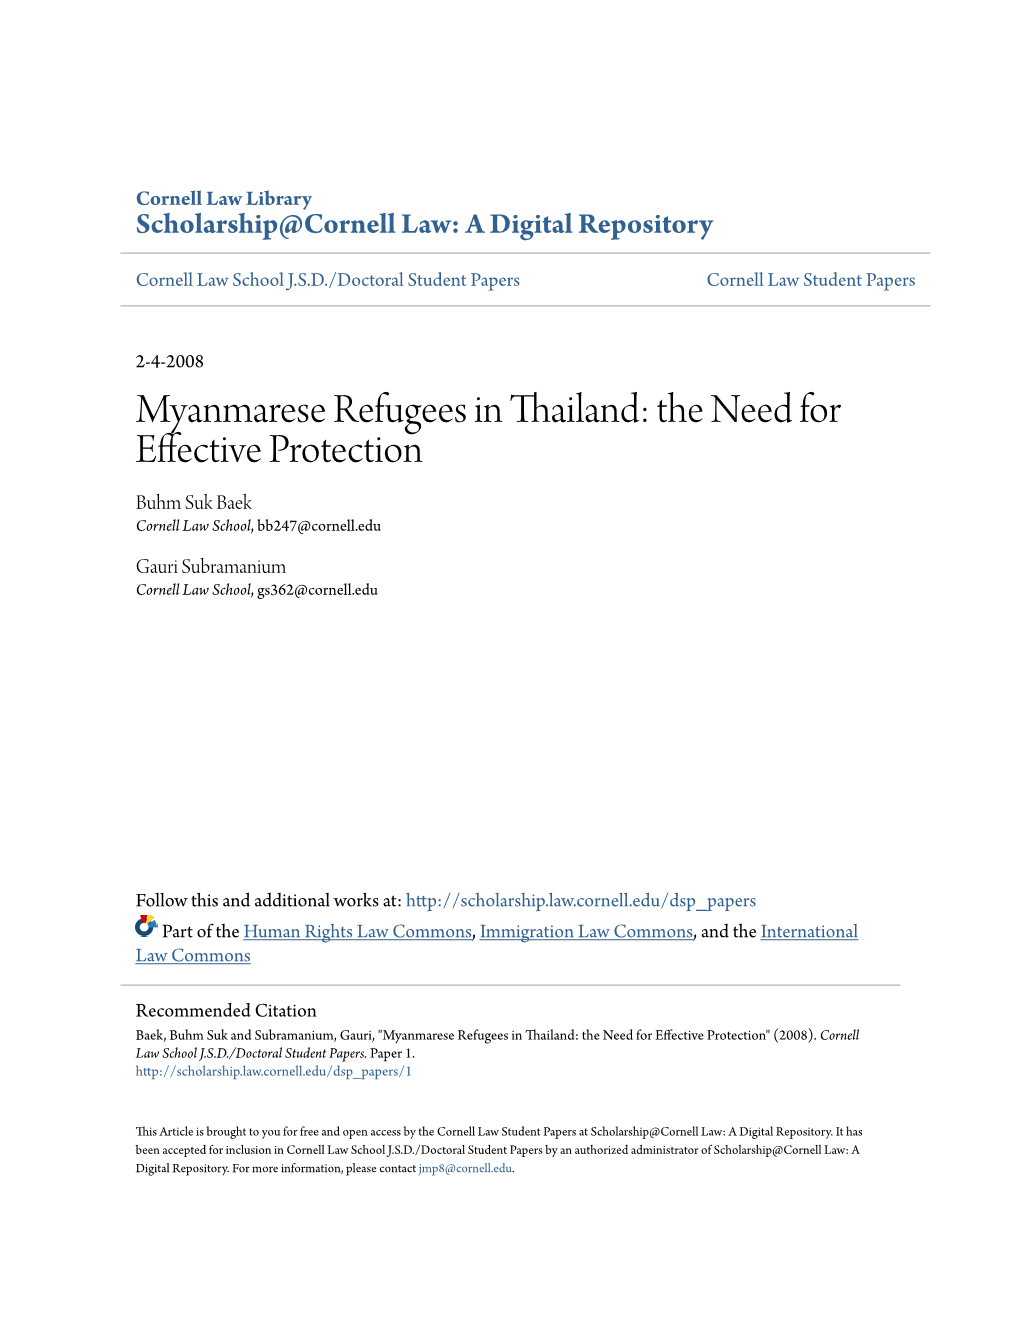 Myanmarese Refugees in Thailand: the Need for Effective Protection Buhm Suk Baek Cornell Law School, Bb247@Cornell.Edu